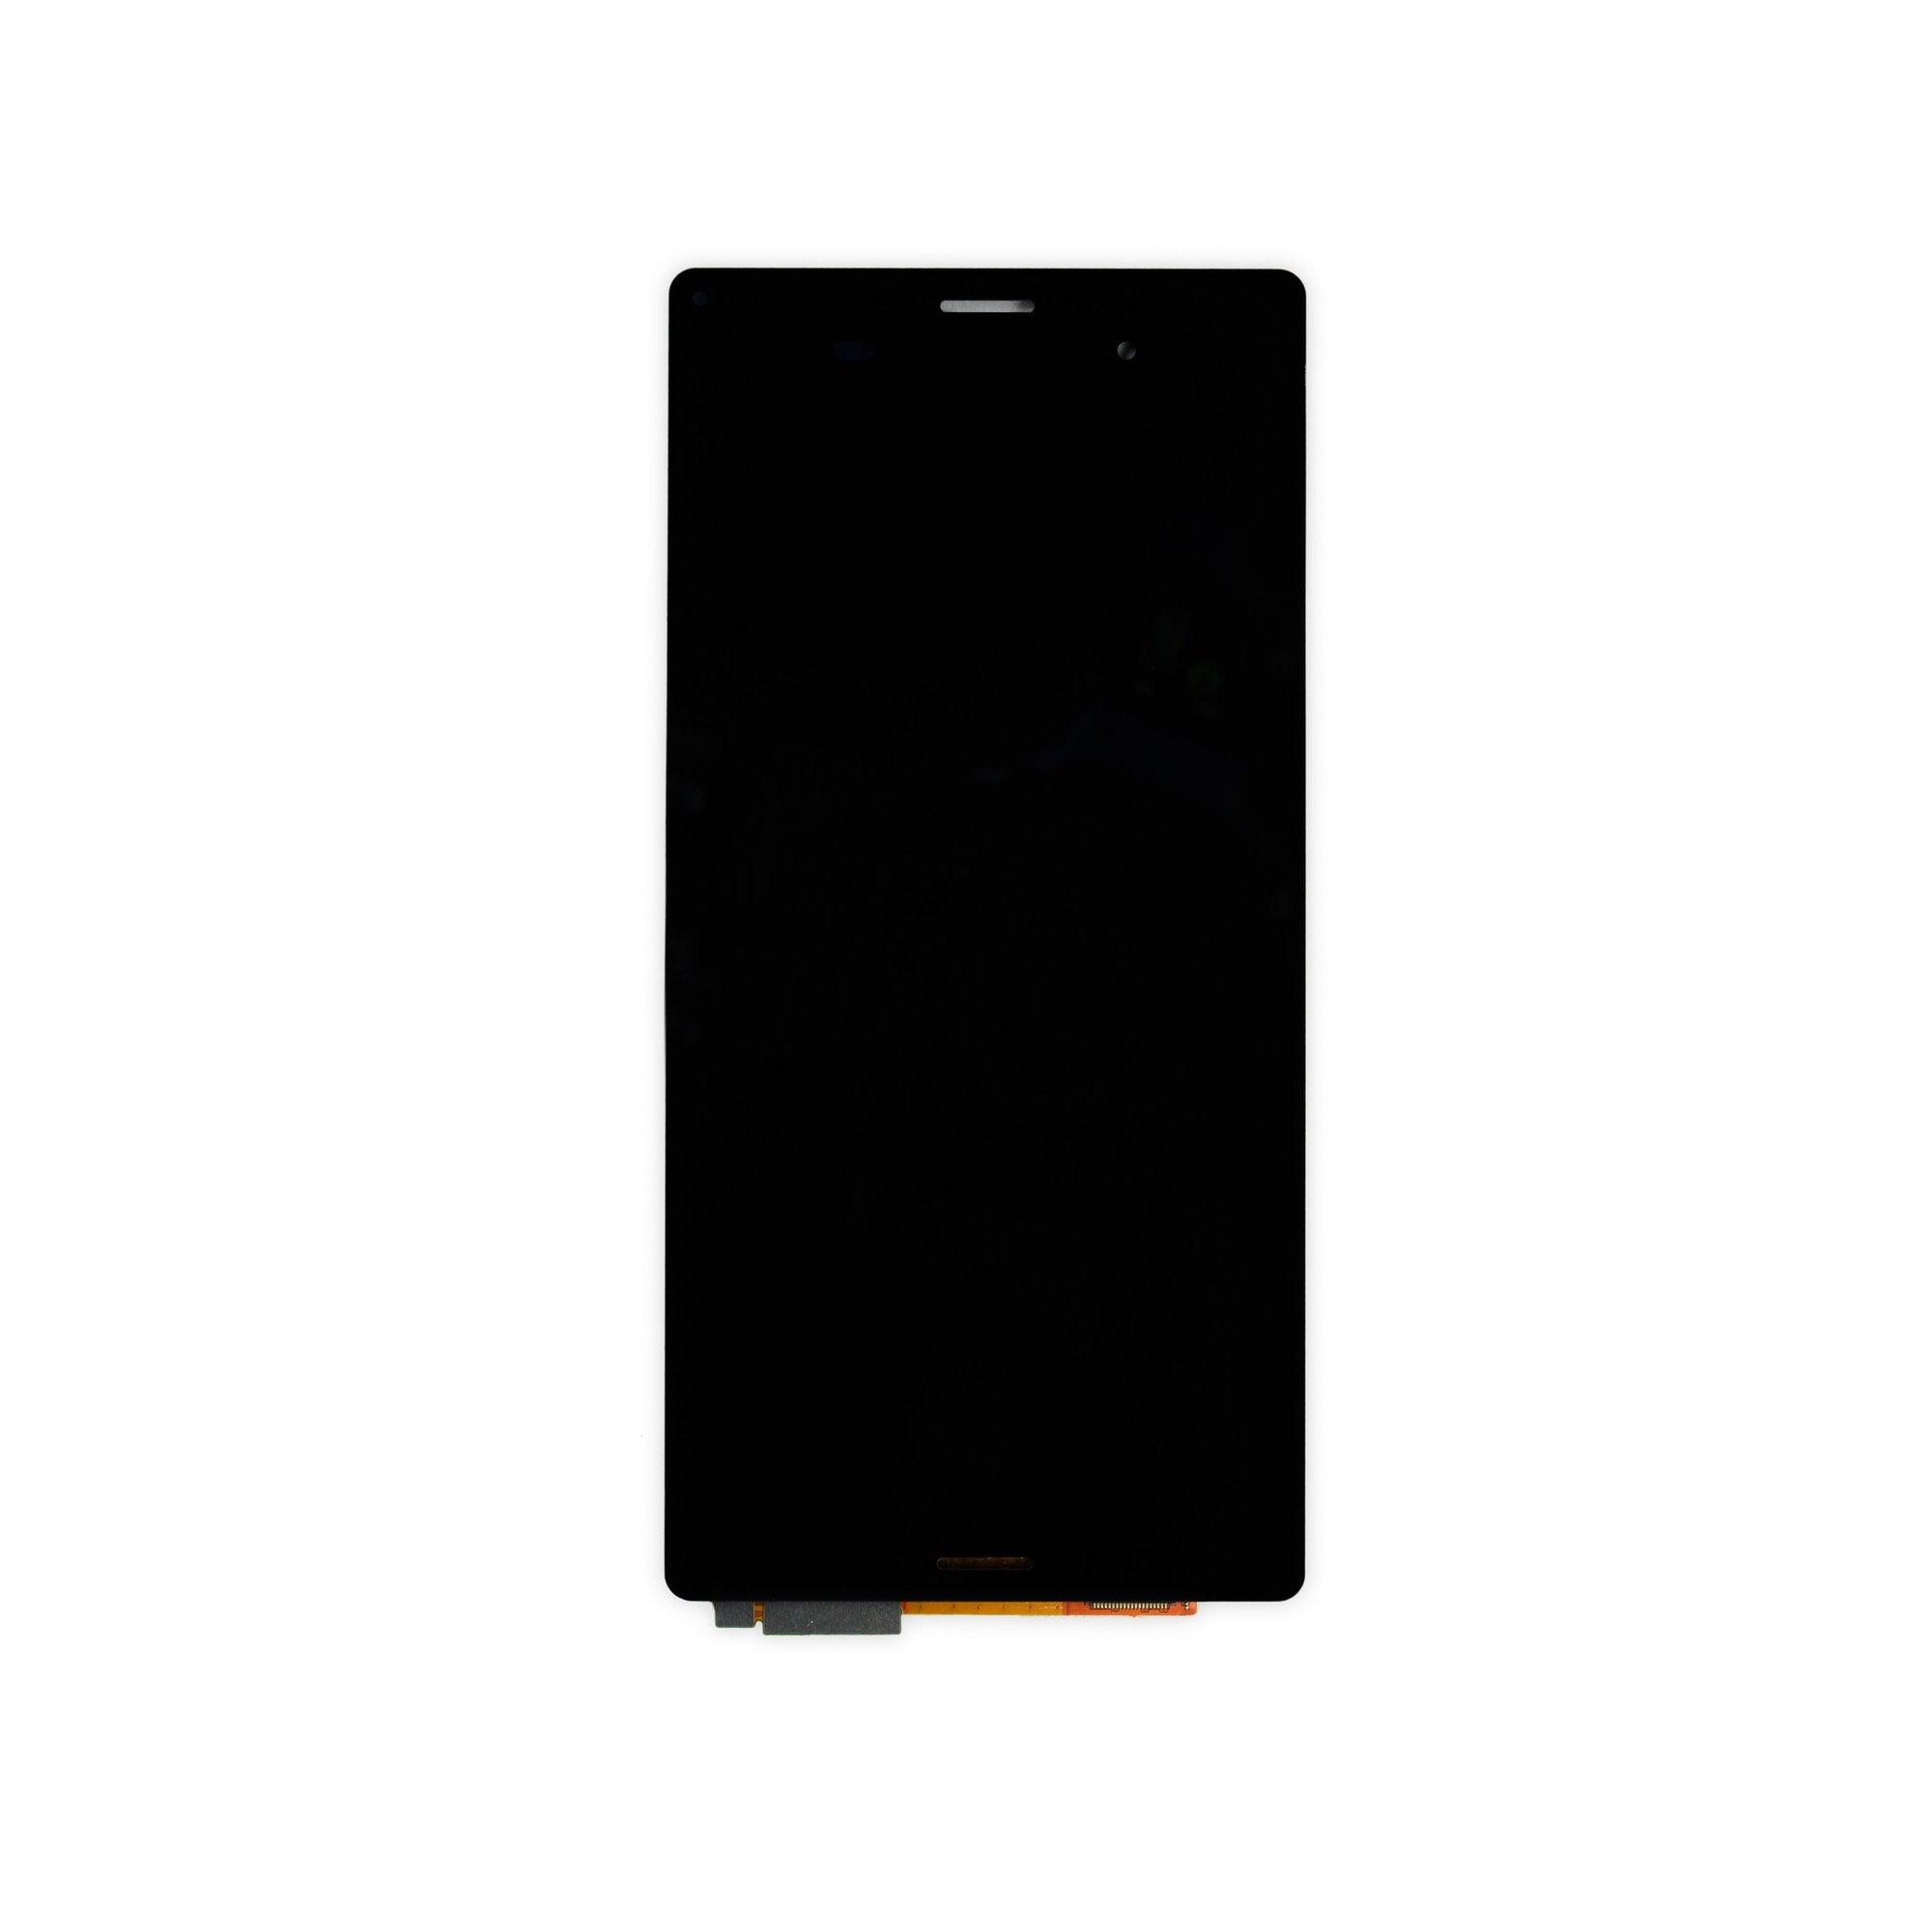 Sony Xperia Z3 and Z3 Dual Screen Black New Part Only